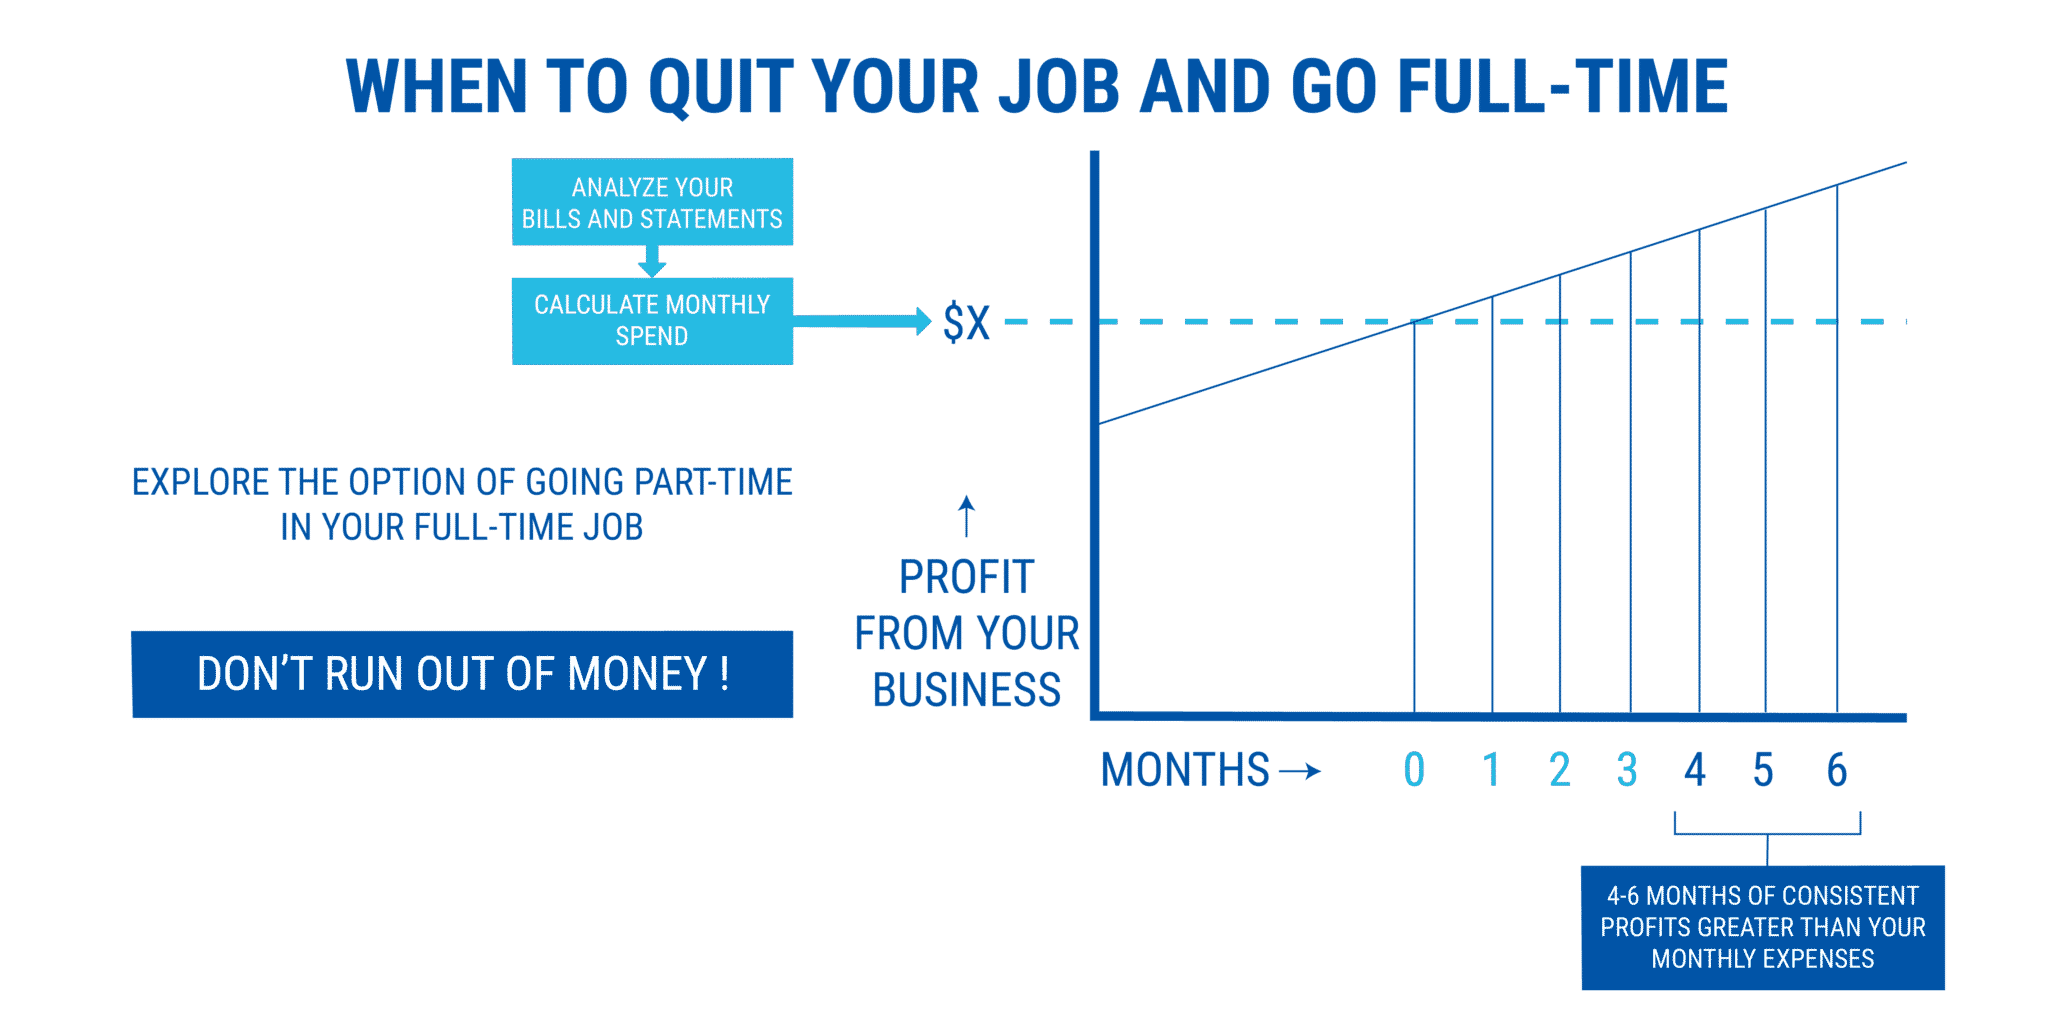 when to quit your job and go full-time - staring a coaching business while working full-time